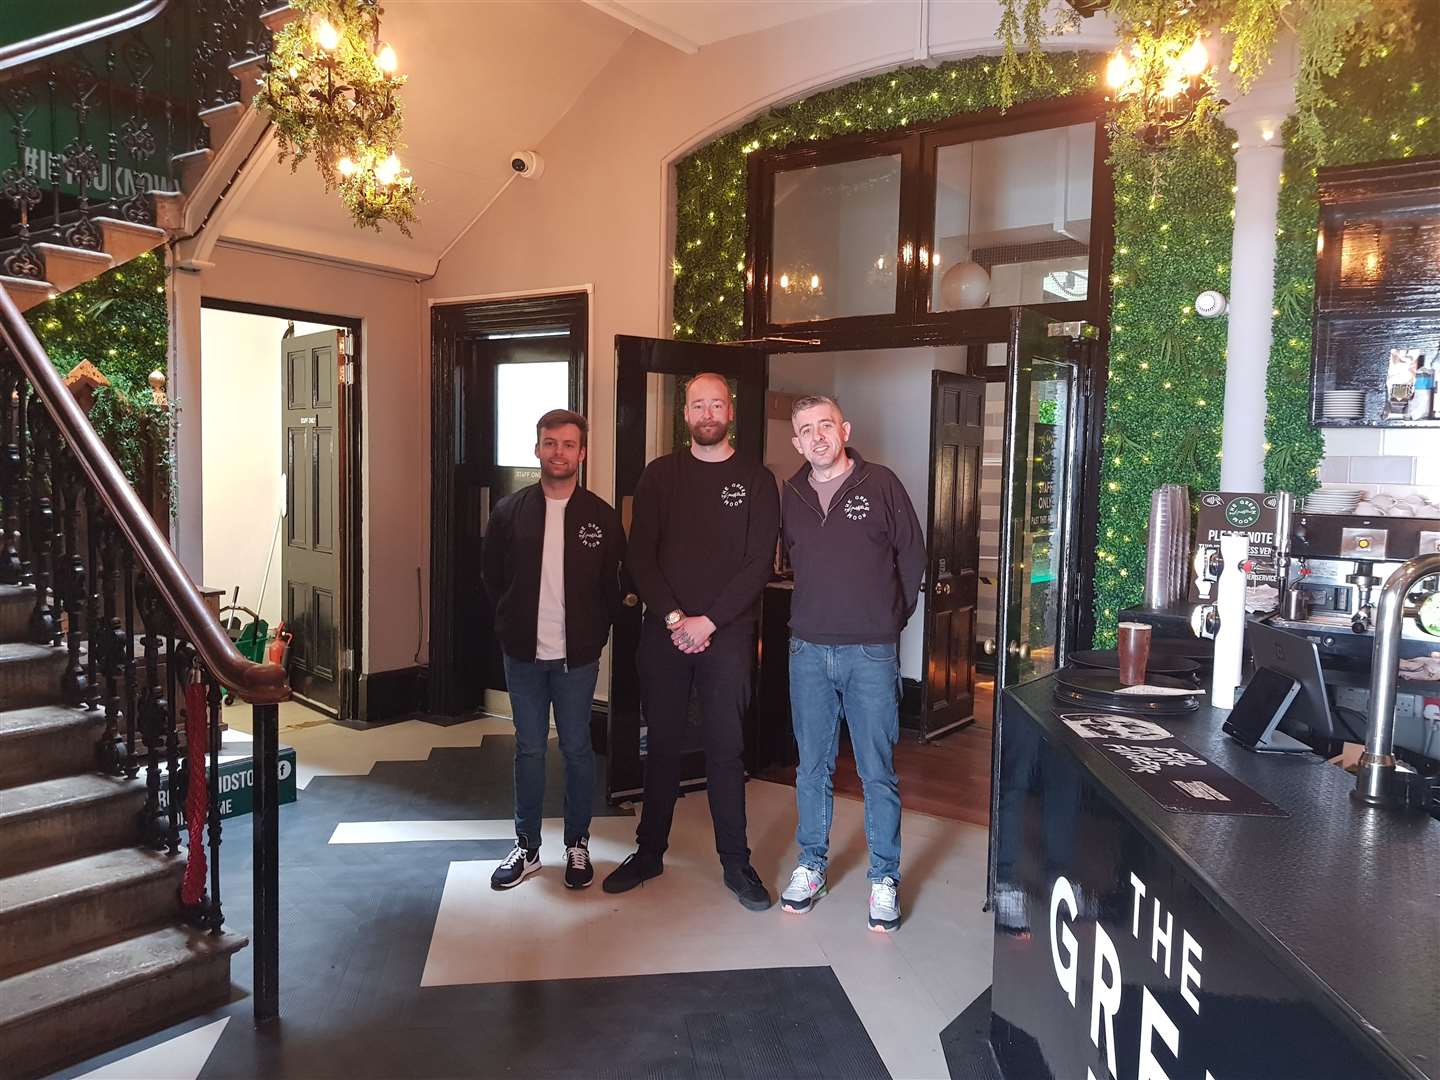 The Green Room was opened by directors Richard Carerra, Matt Shead and Chris Ansell in May 2021